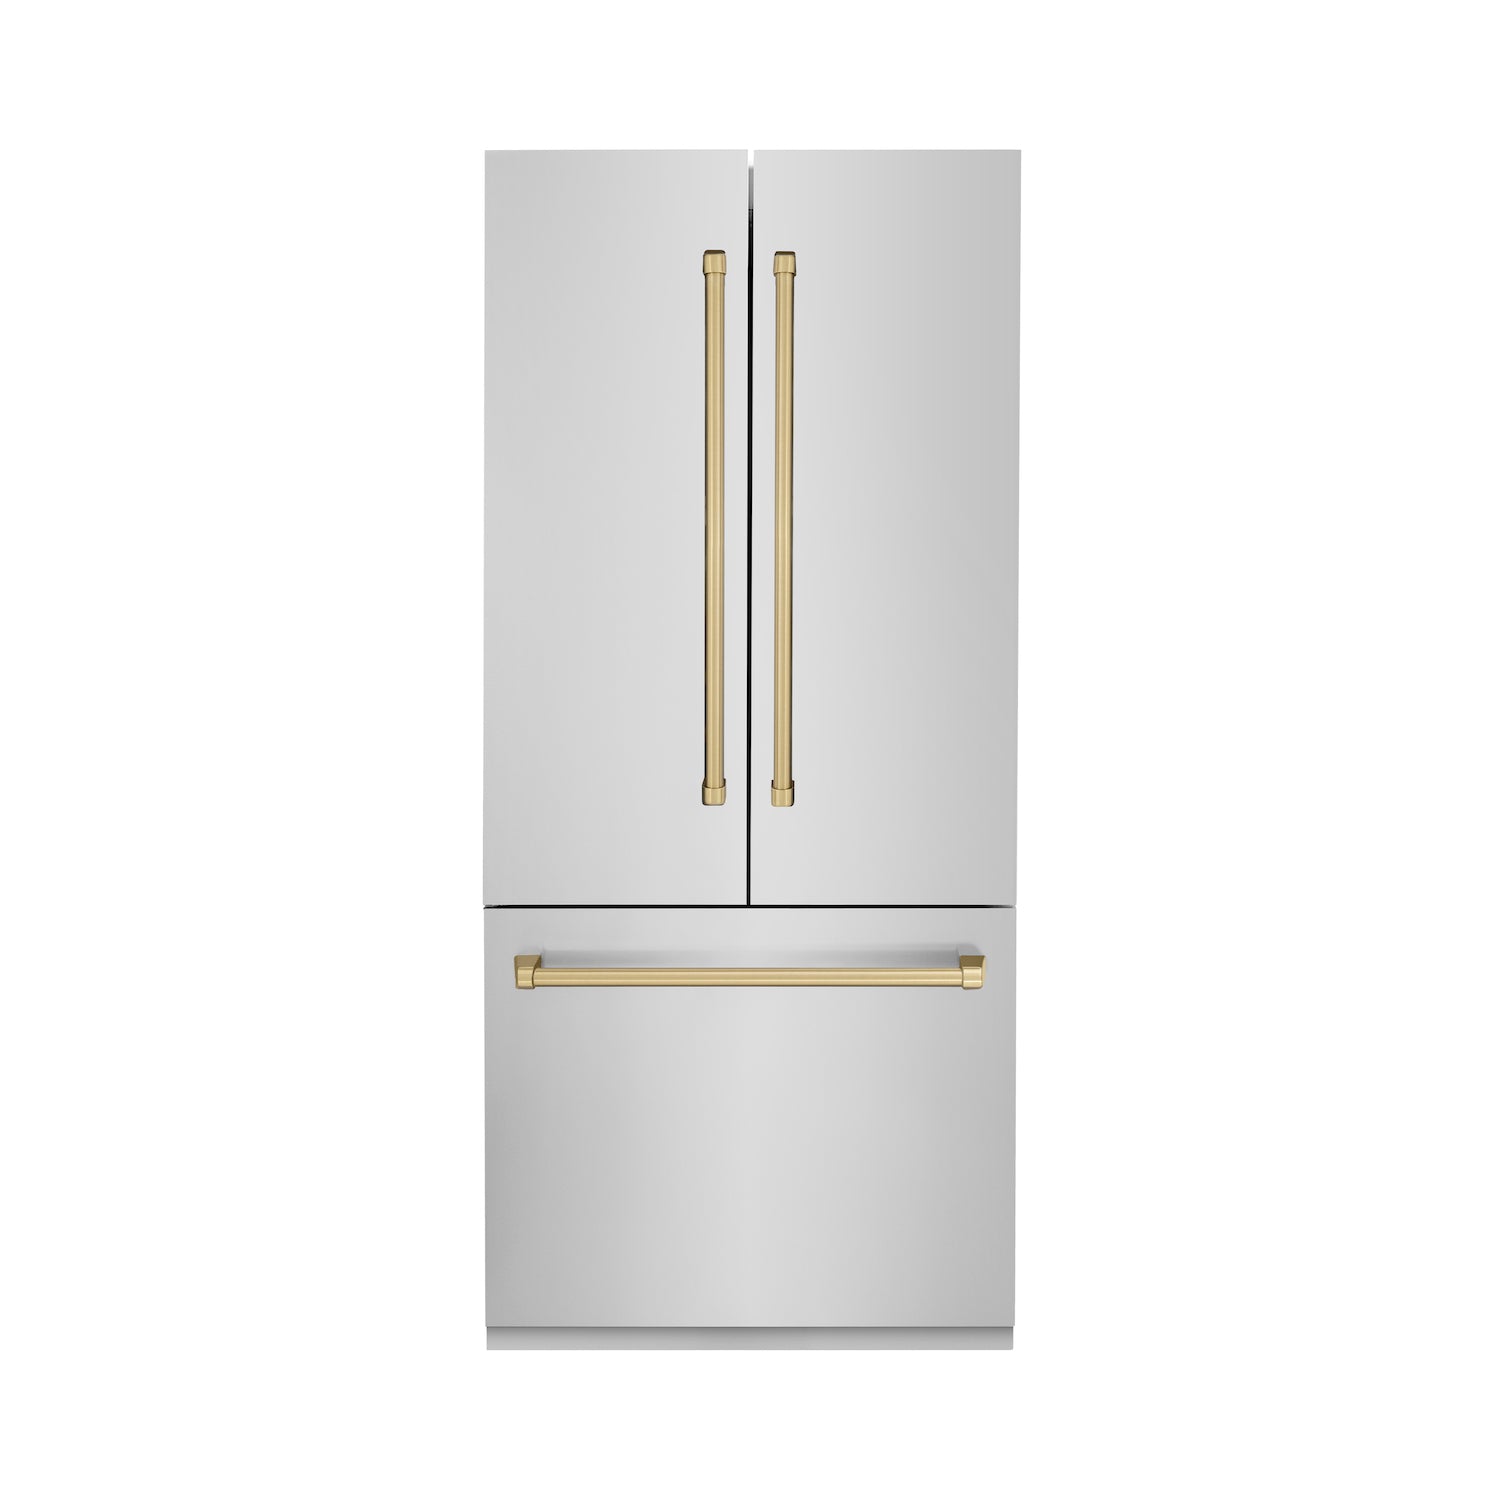 ZLINE 36" Built-in French Door Refrigerator with Stainless Steel panels front.